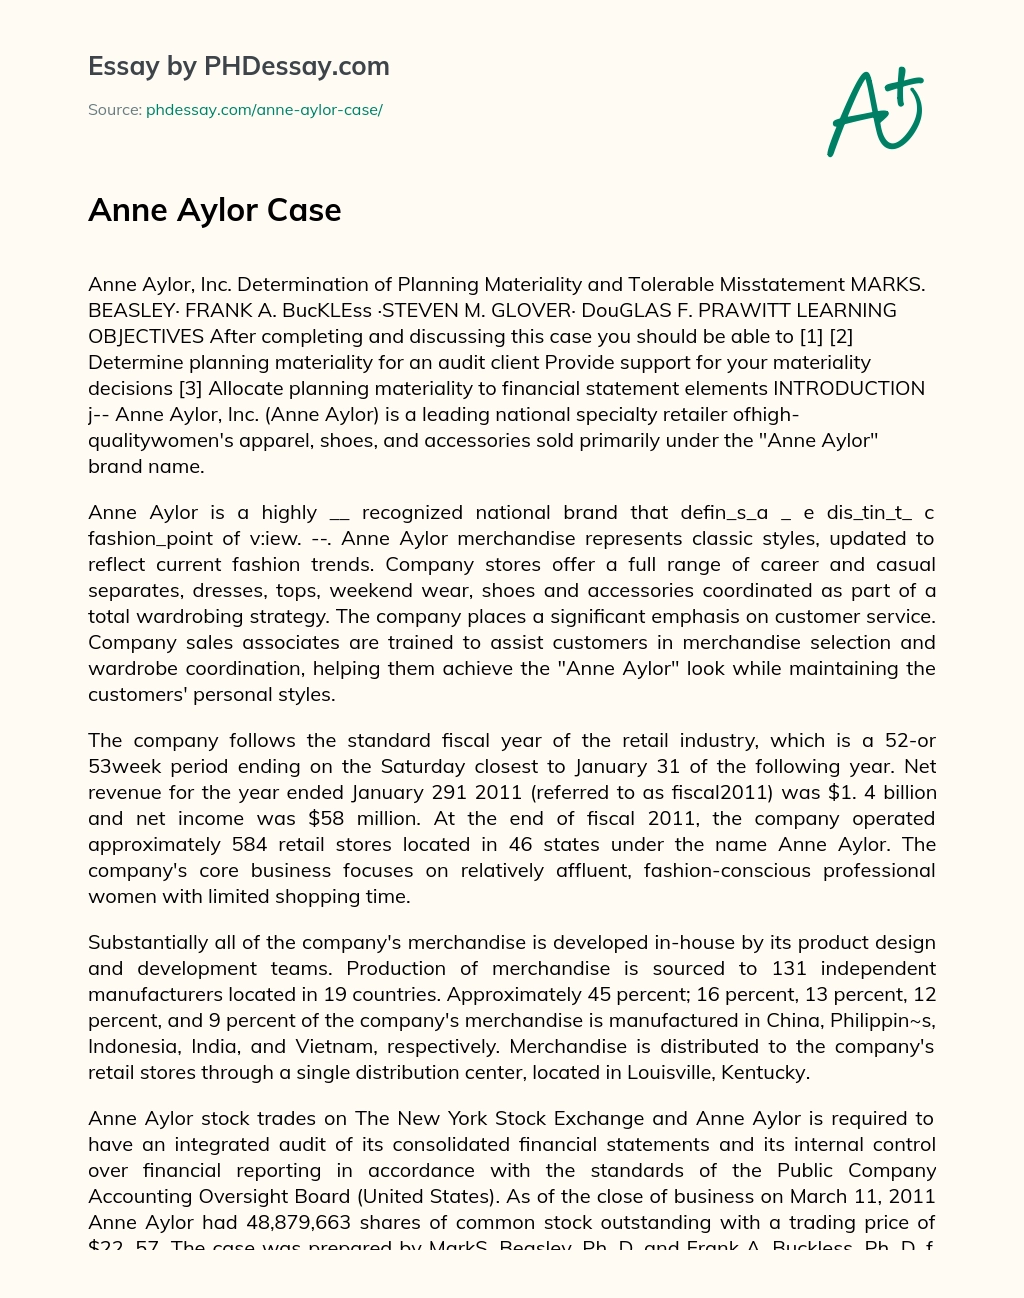 Determining Planning Materiality for Anne Aylor, Inc. – A Case Study in Auditing essay